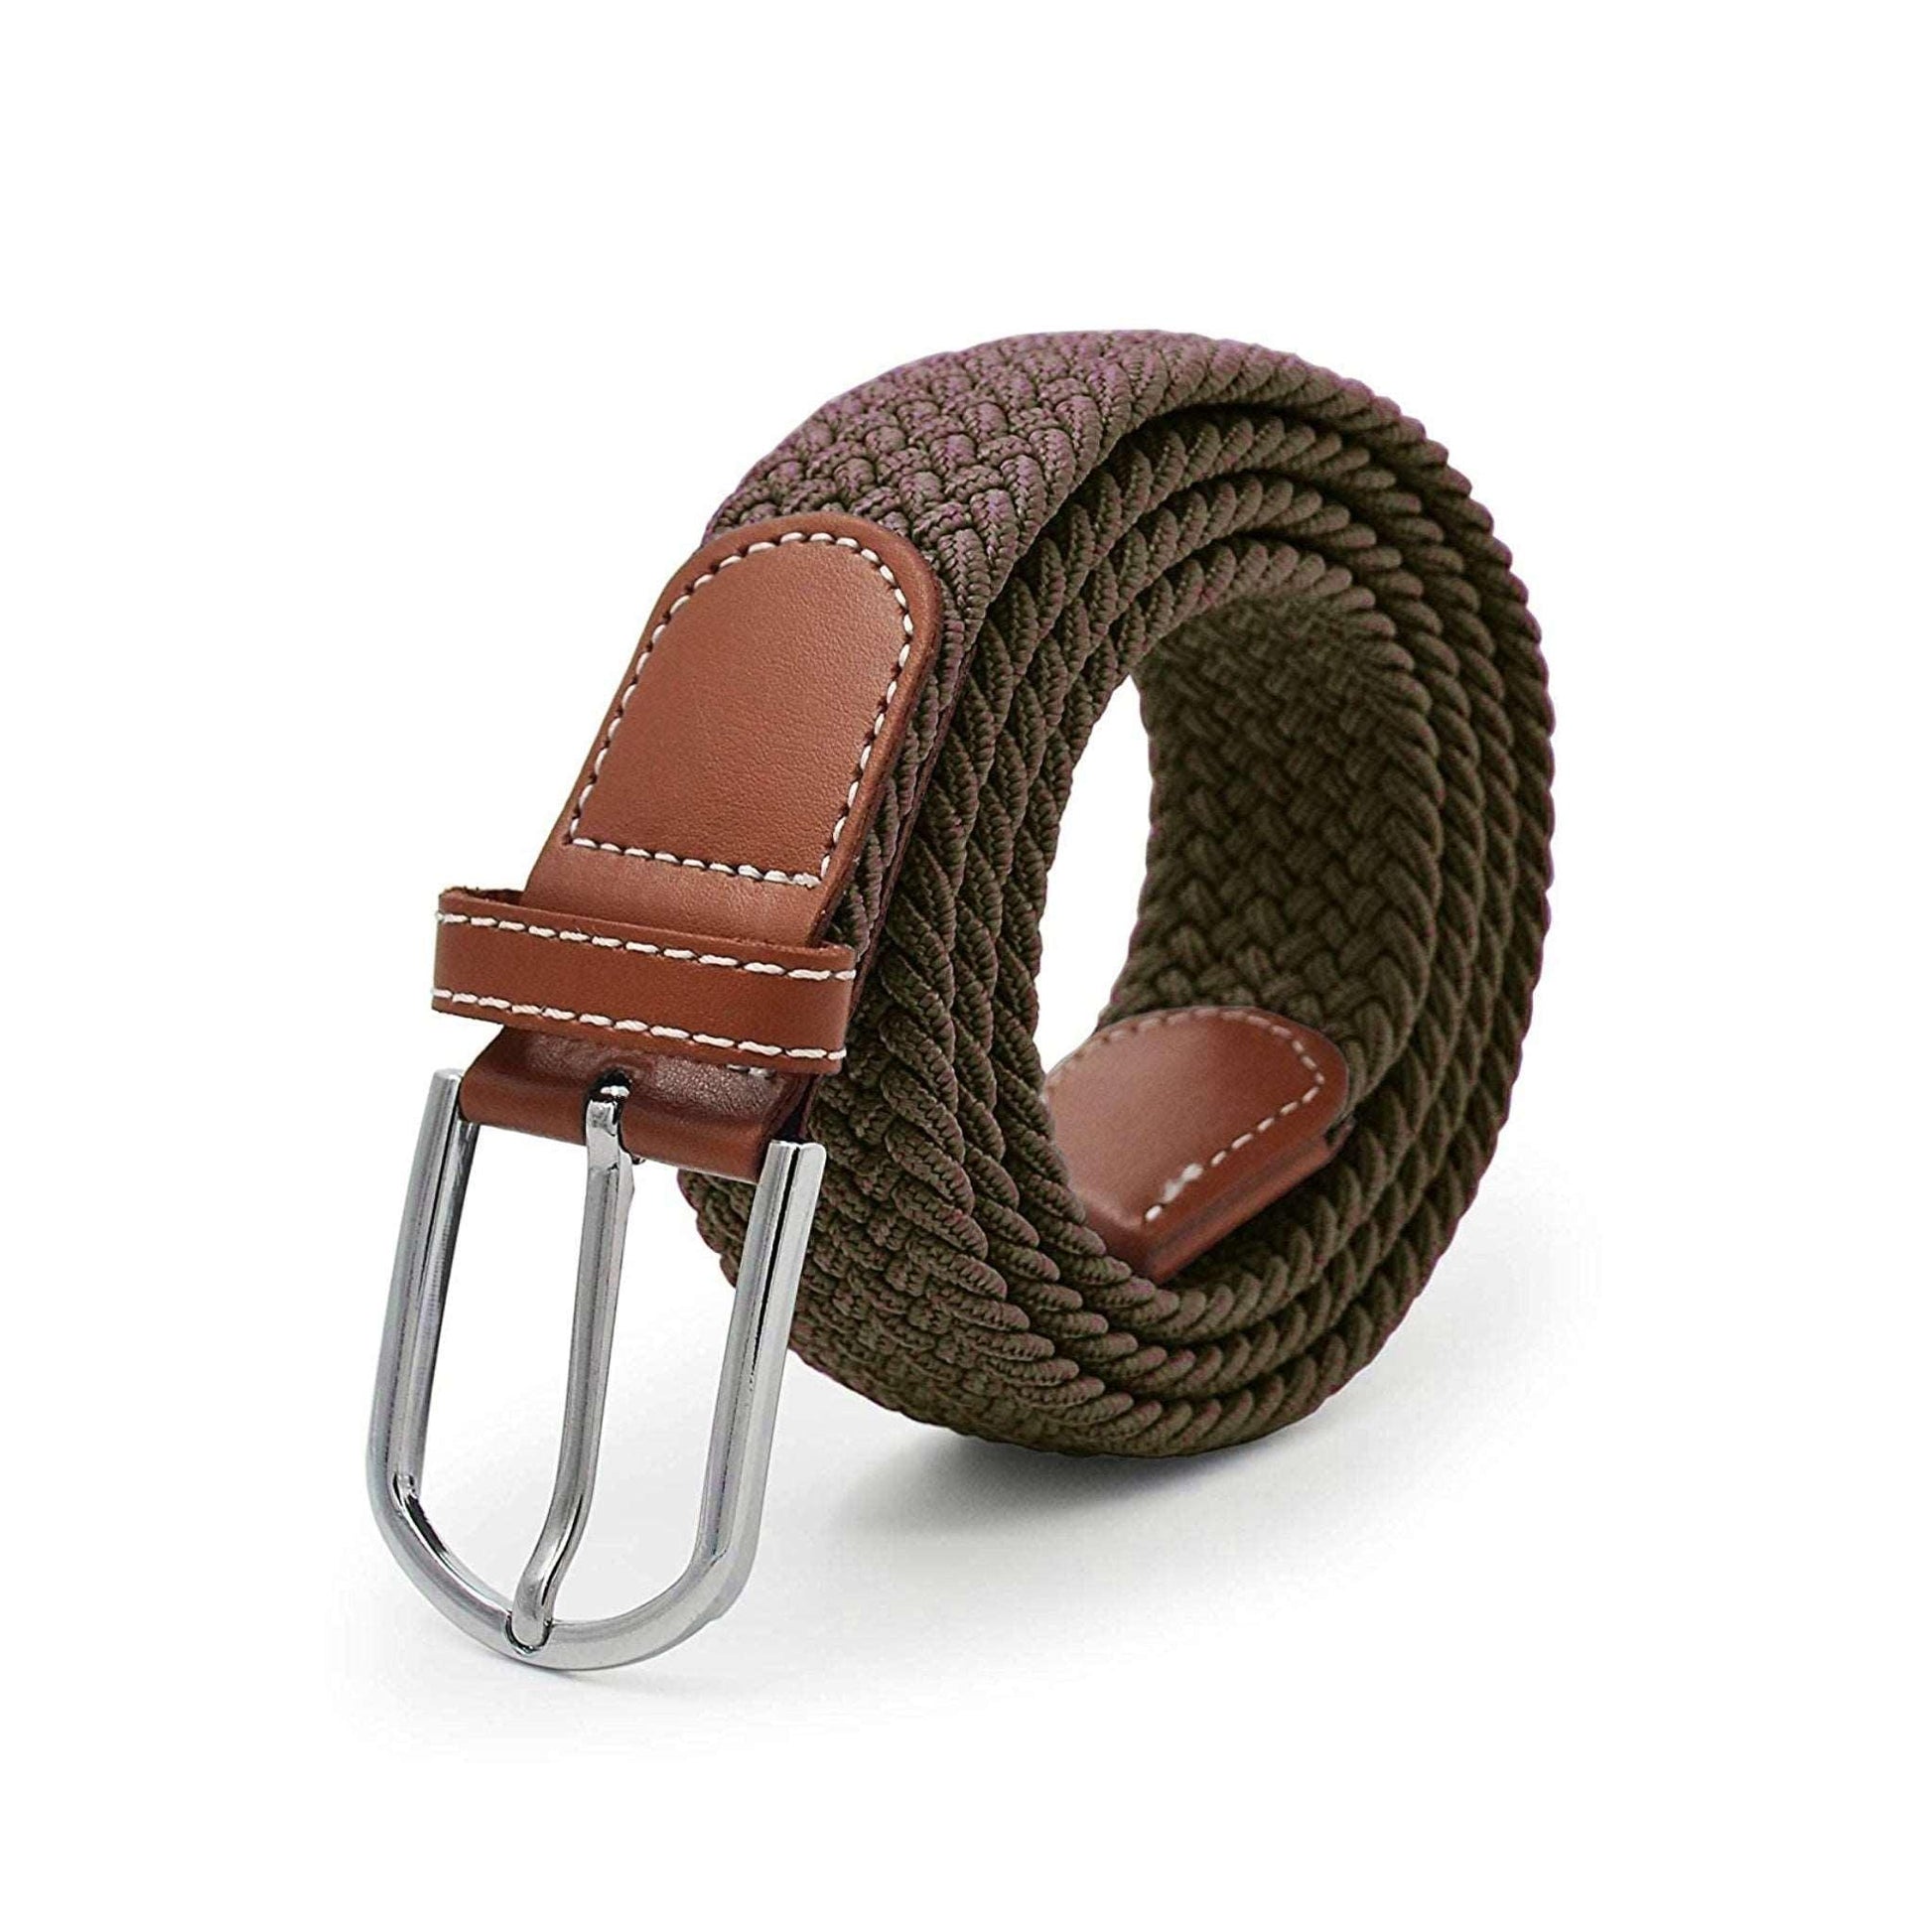 YOUTH ROBE Women's Belt (Brown) - YOUTH ROBE